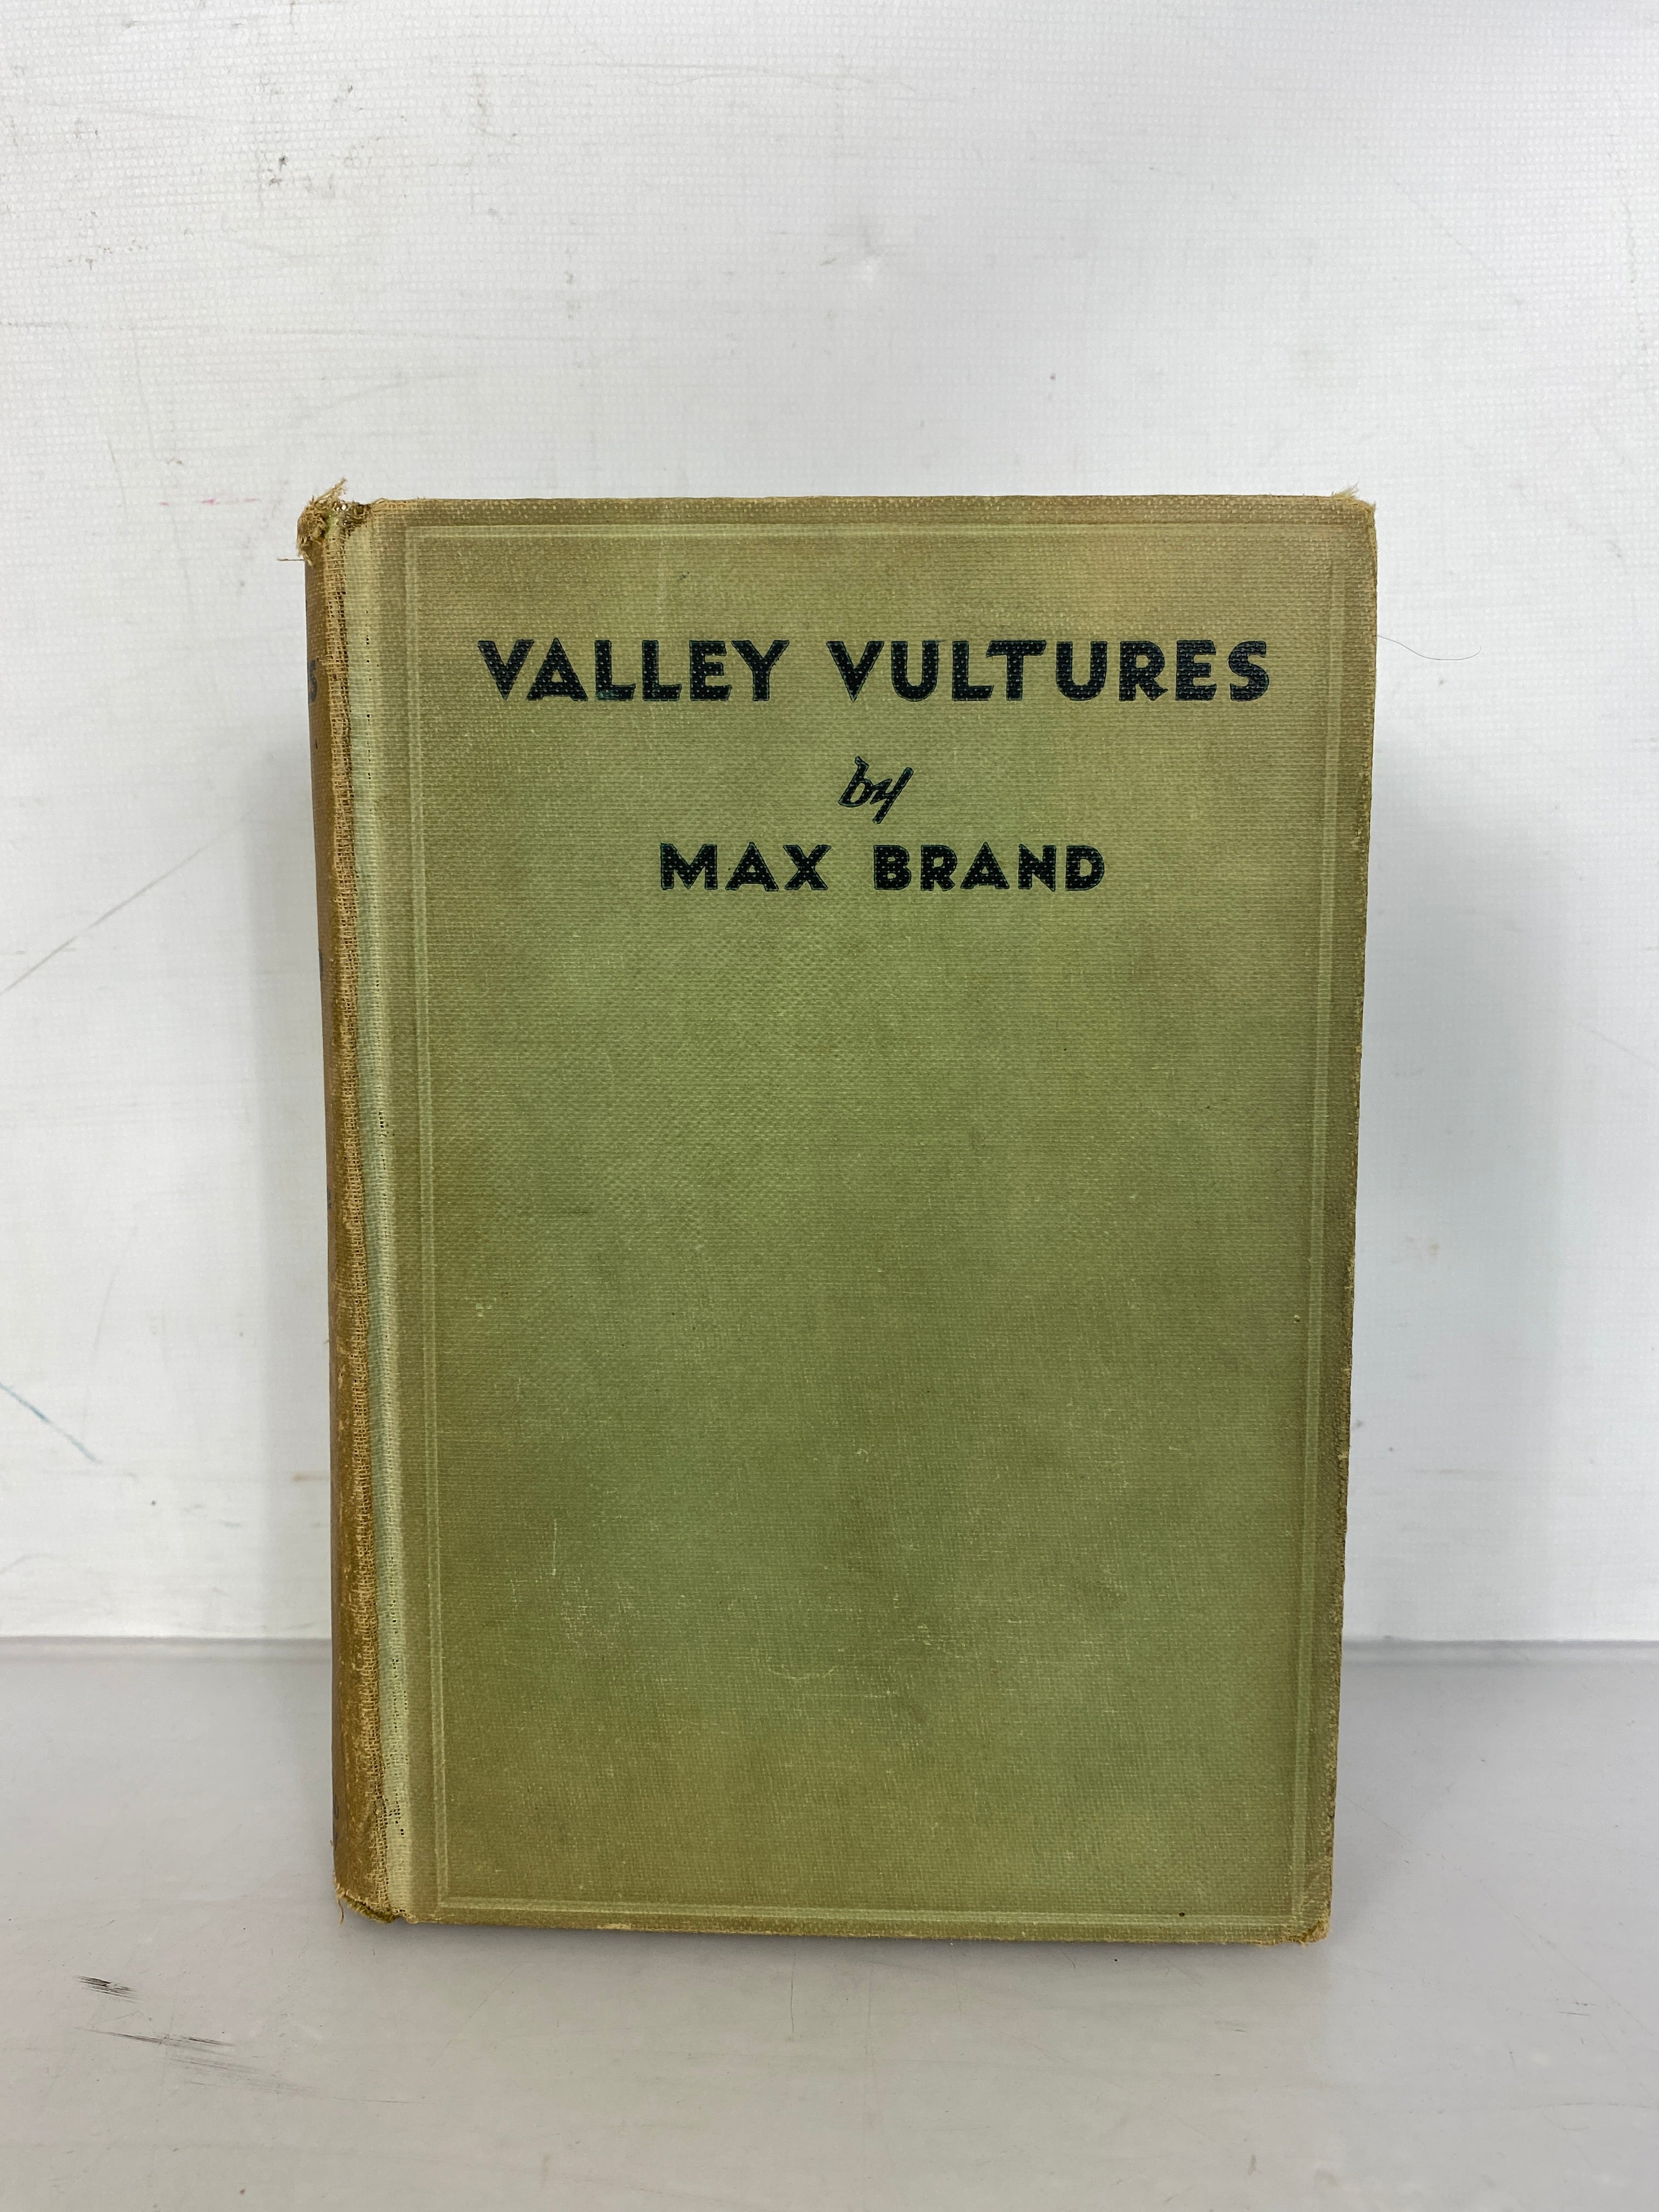 Valley Vultures by Max Brand 1932 Vintage Western Novel HC Rare